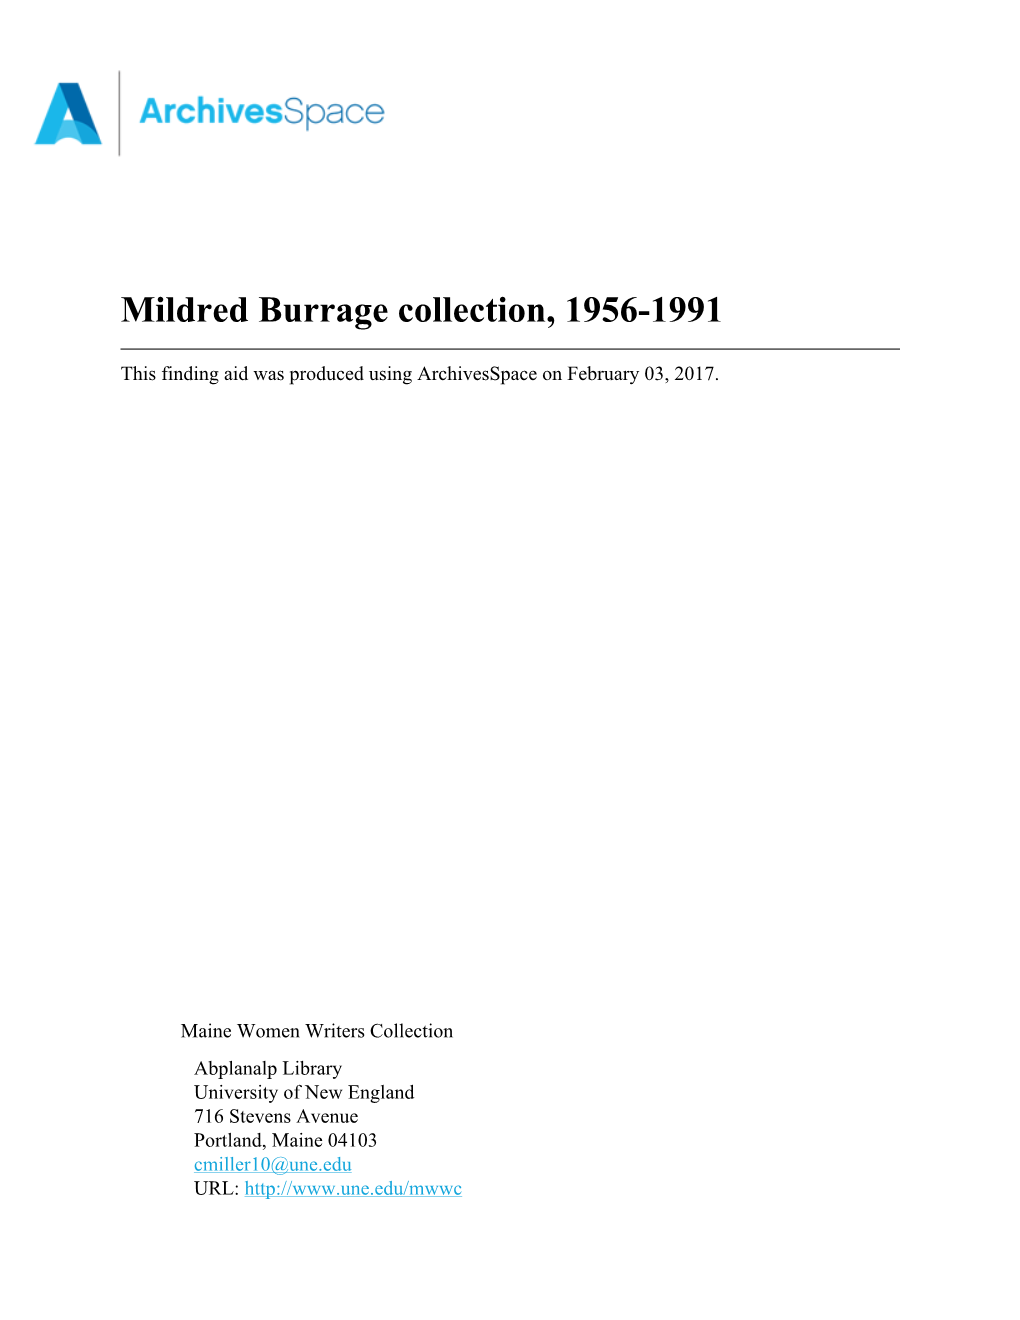 Mildred Burrage Collection, 1956-1991